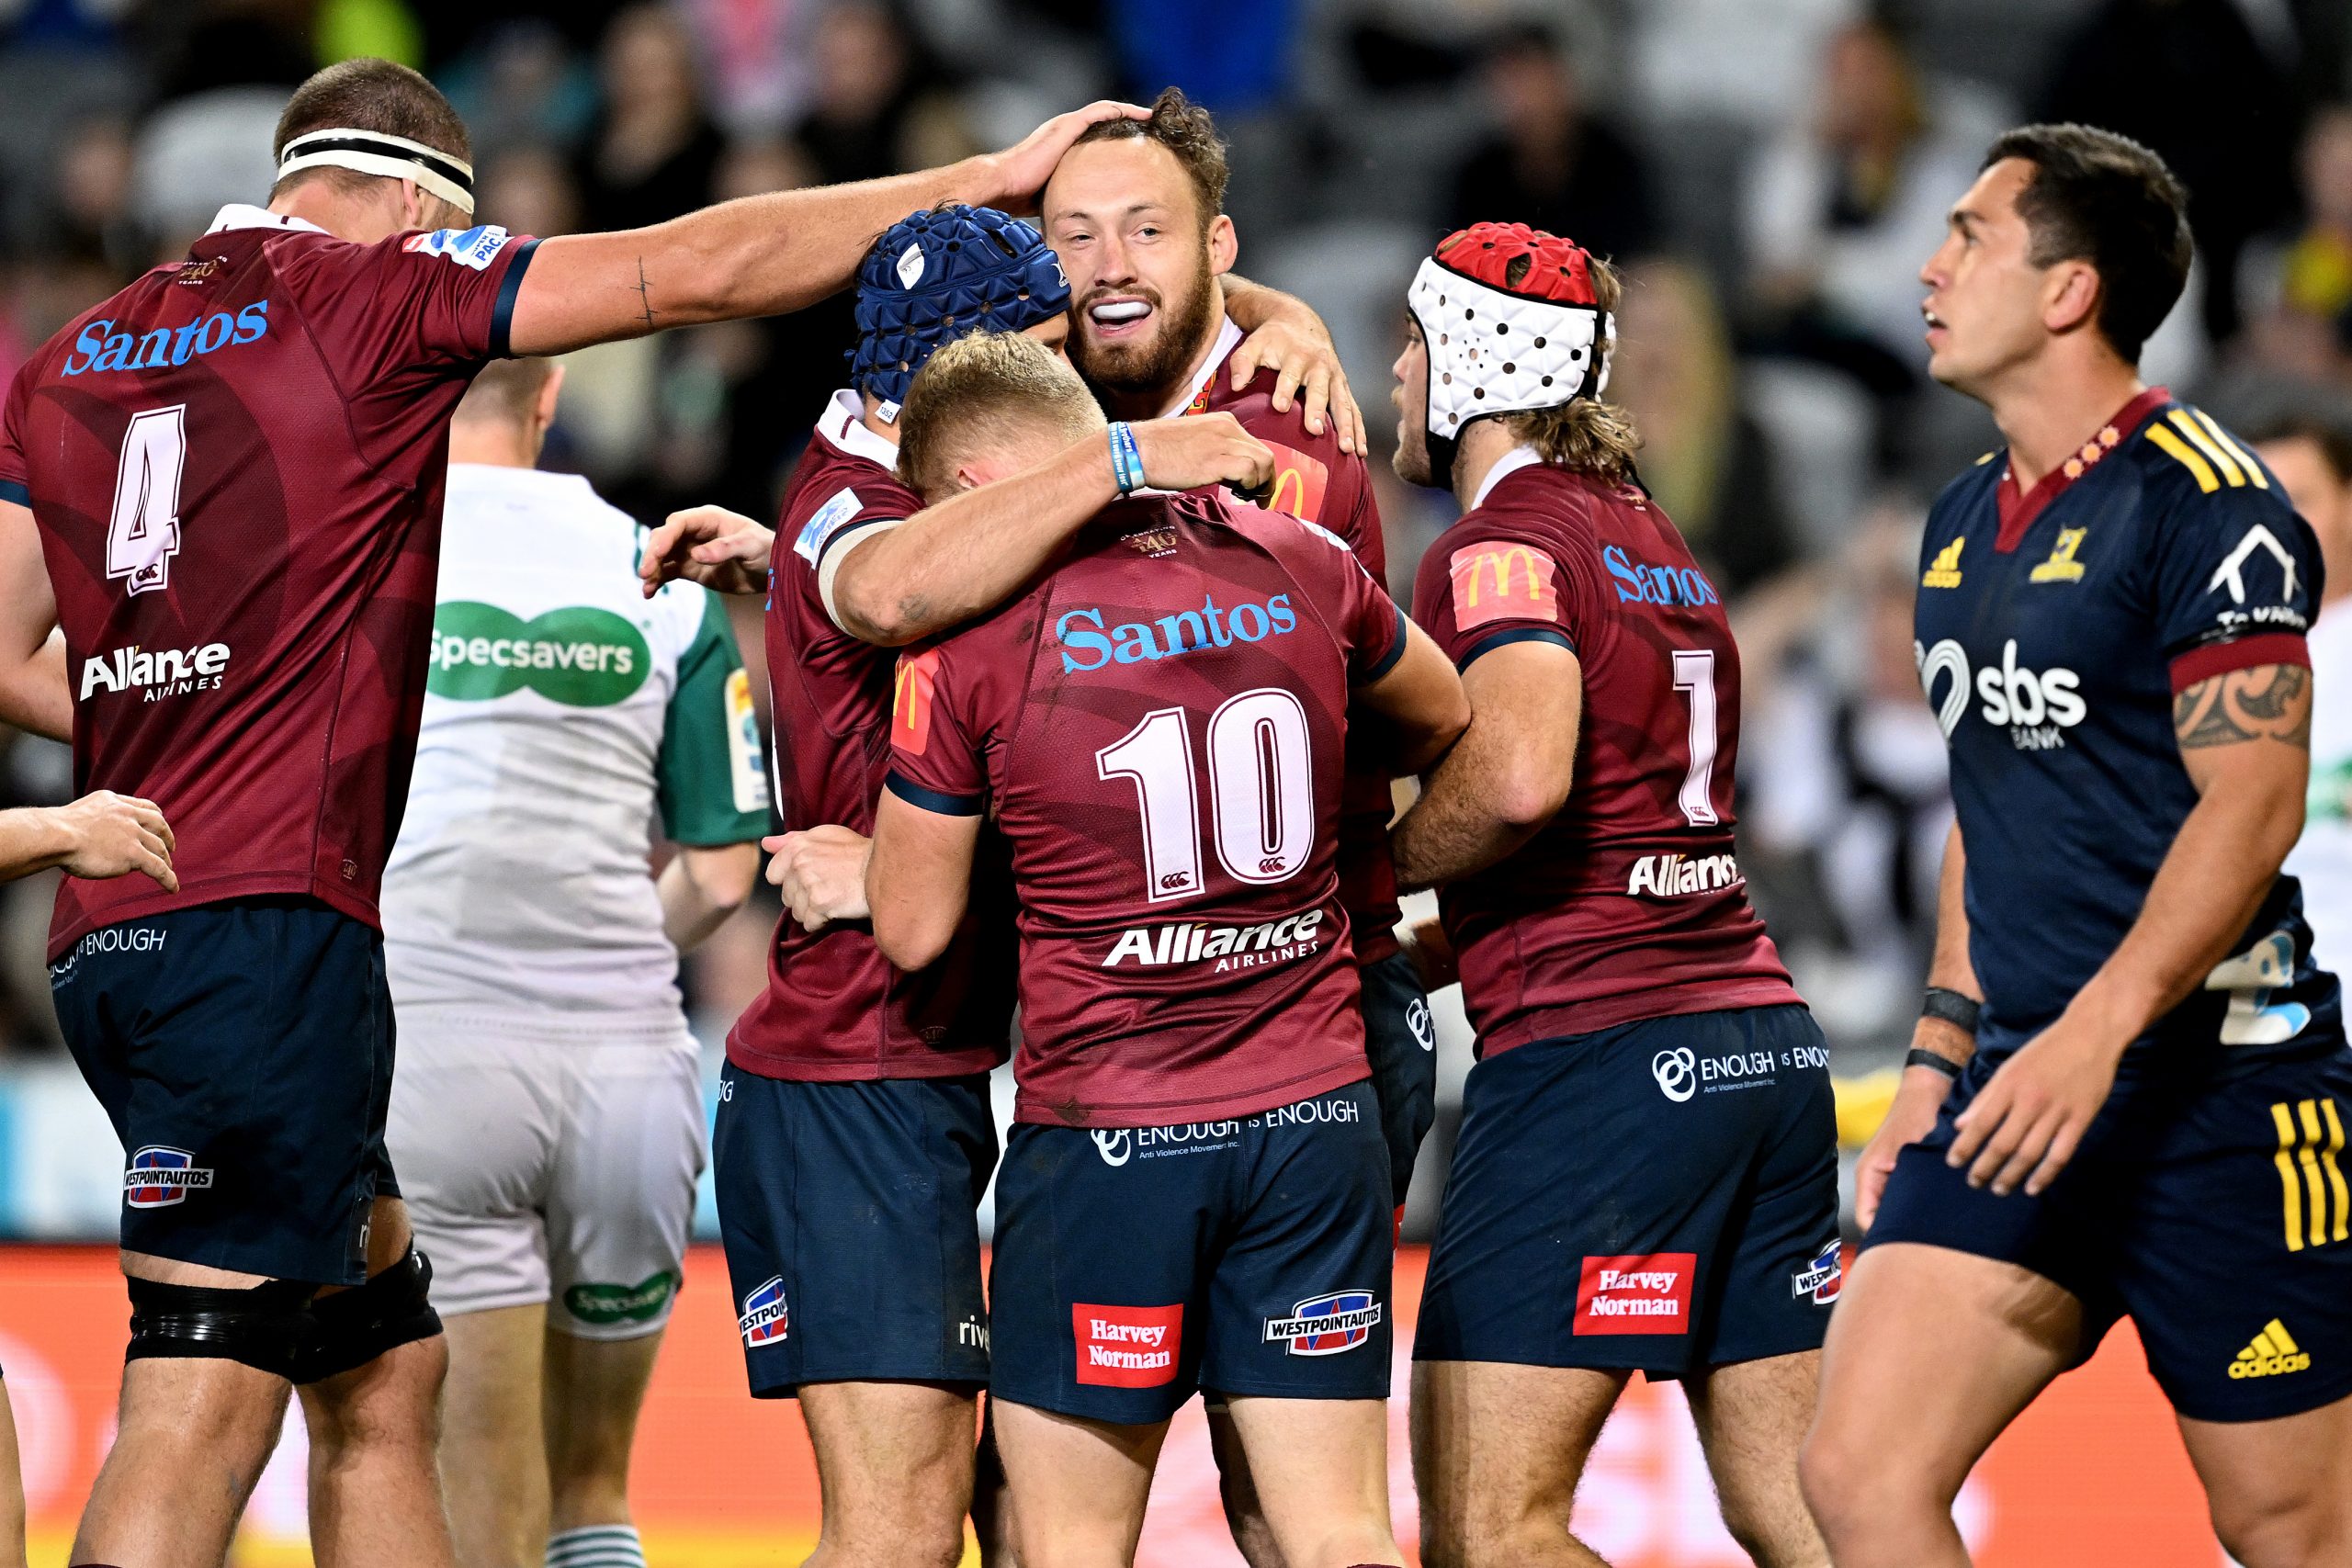 Jake Upfield celebrates with his teammates after scoring a try during the round 14 Super Rugby Pacific match between Highlanders and Queensland Reds.